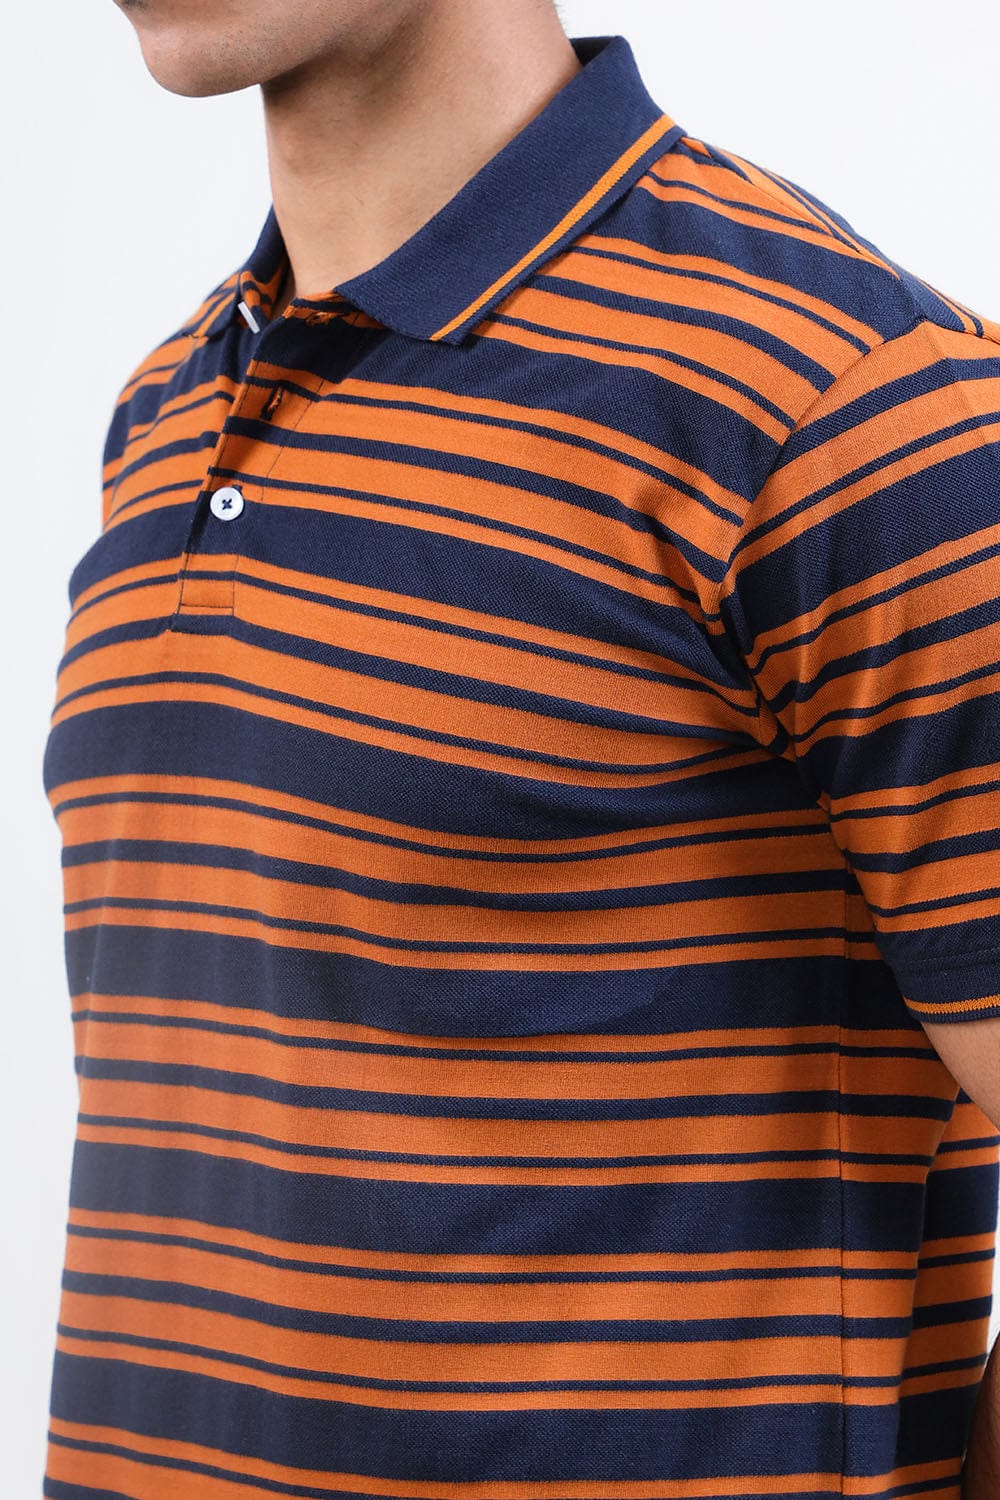 Hope Not Out by Shahid Afridi Men Polo Shirt HNO Orange Yarn Dyed Striped Polo Shirt for Men